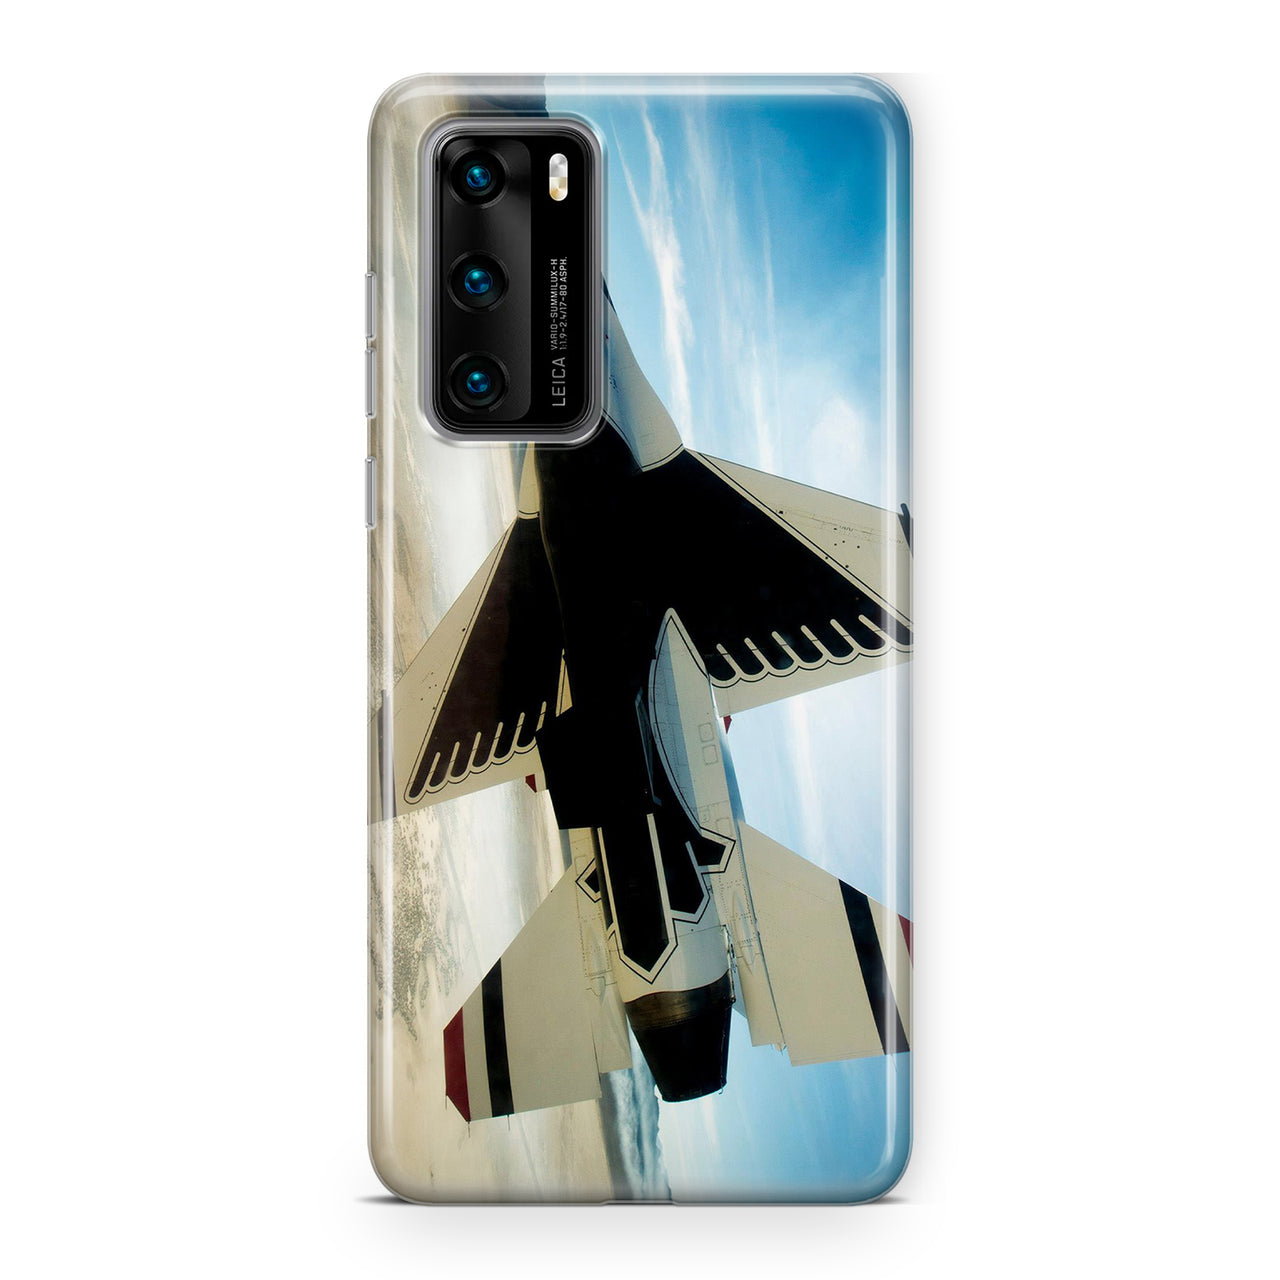 Turning Right Fighting Falcon F16 Designed Huawei Cases